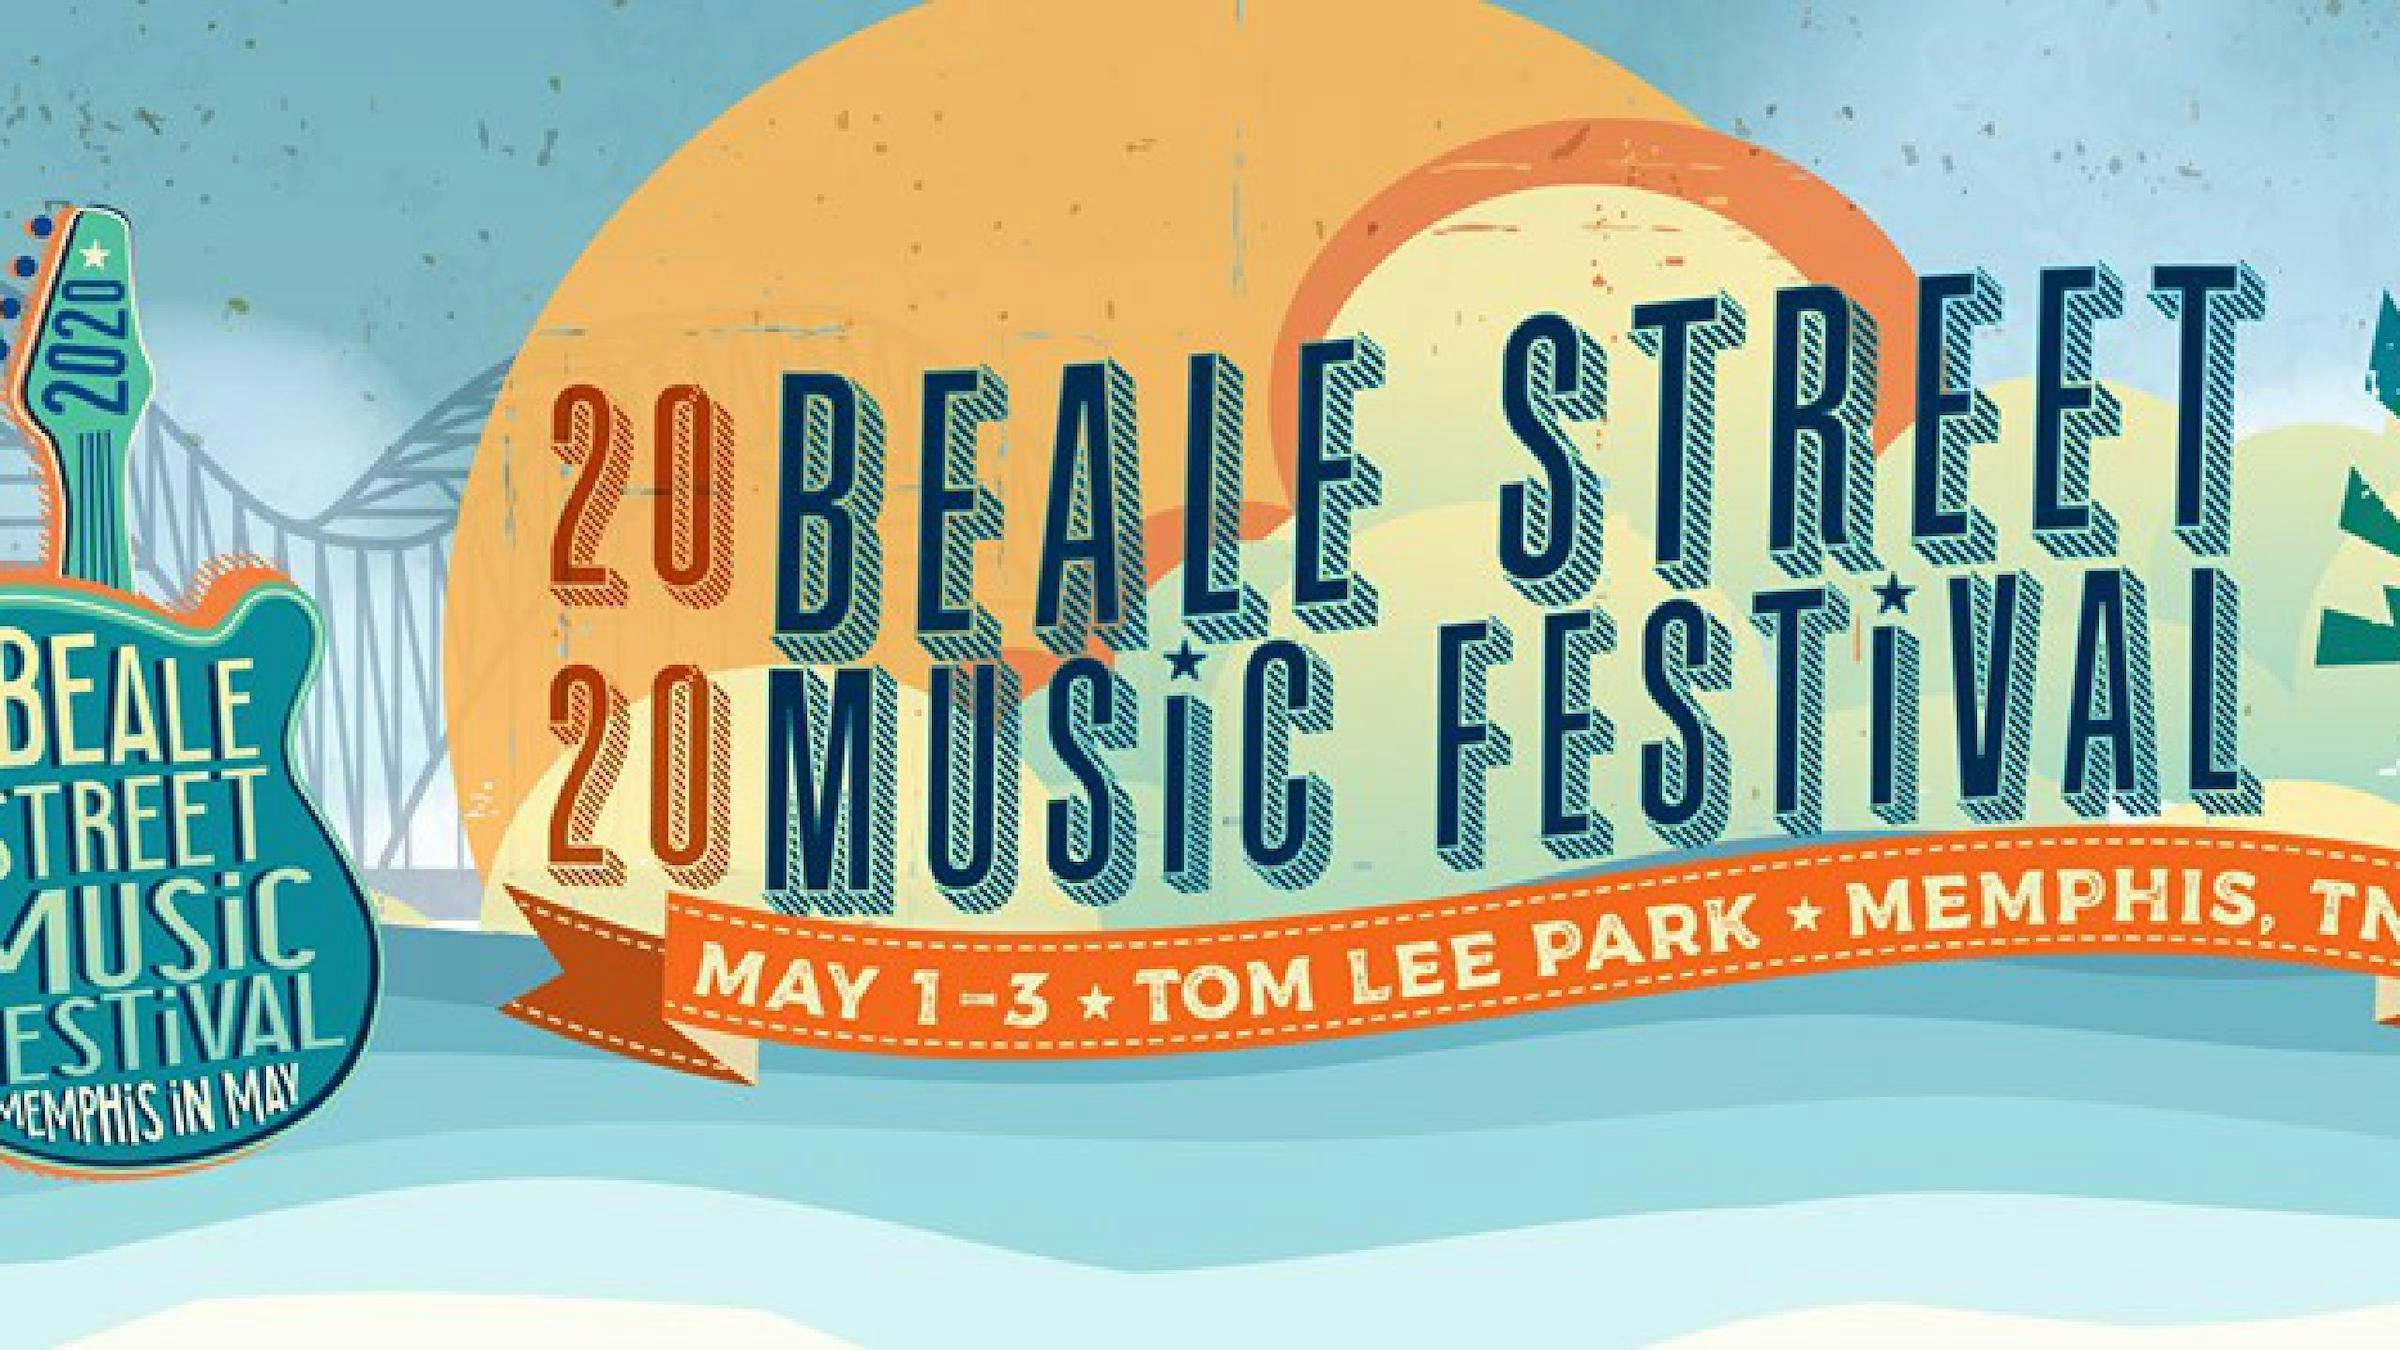 Weezer, Smashing Pumpkins and Deftones To Play This Year’s Beale Street Music Festival